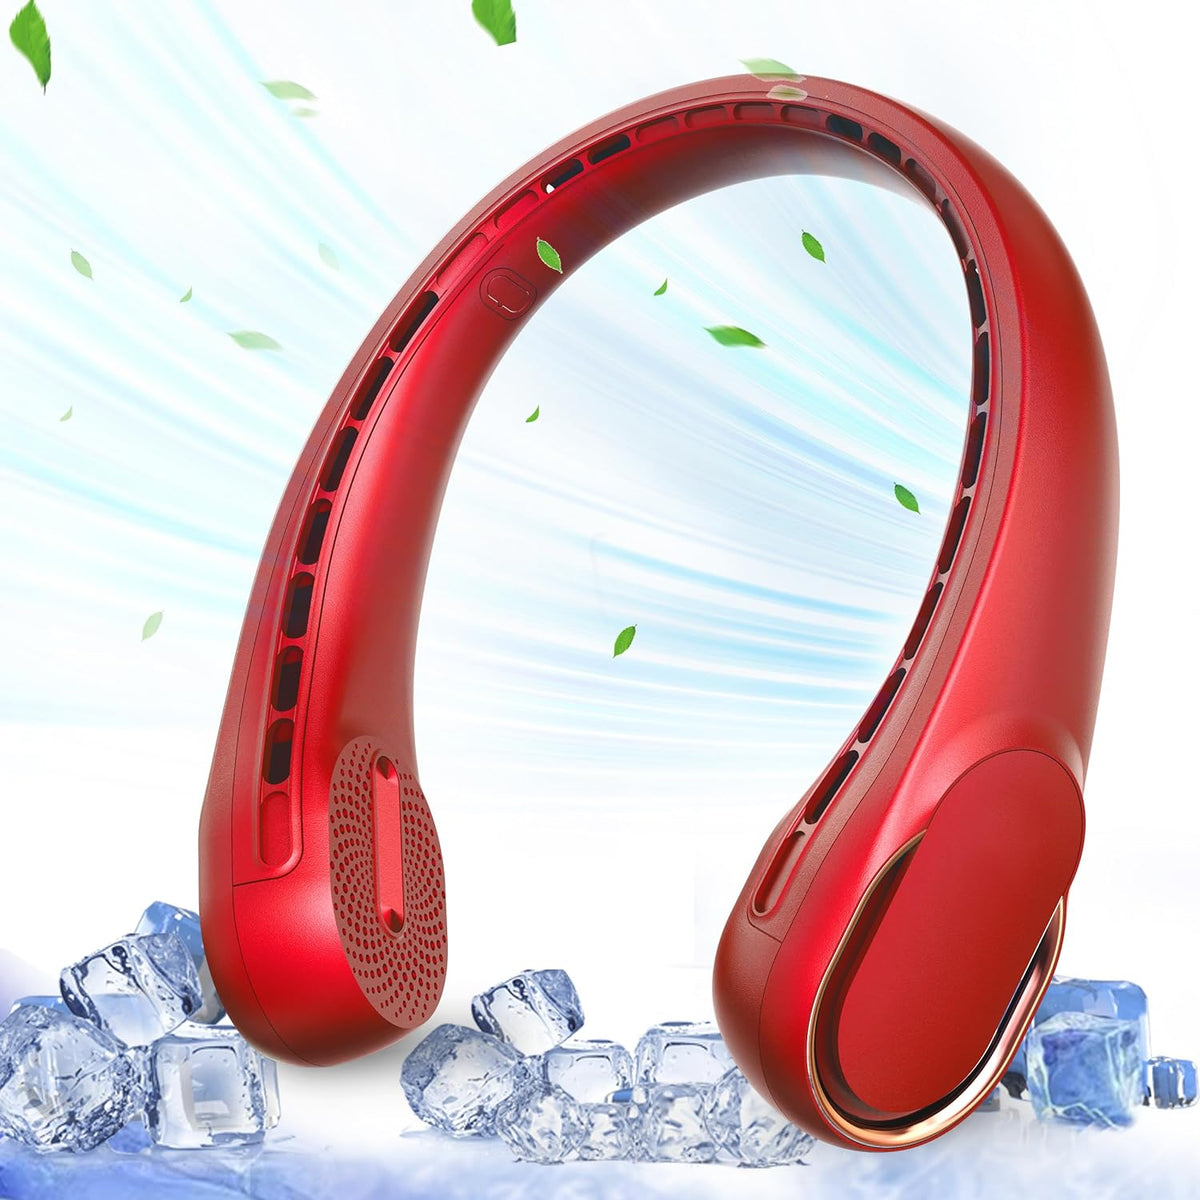 Neck Fan, USB Rechargeable Personal Fan, 4000 mAh Battery Operated, 3 Speeds Adjustable, Faster Cooling